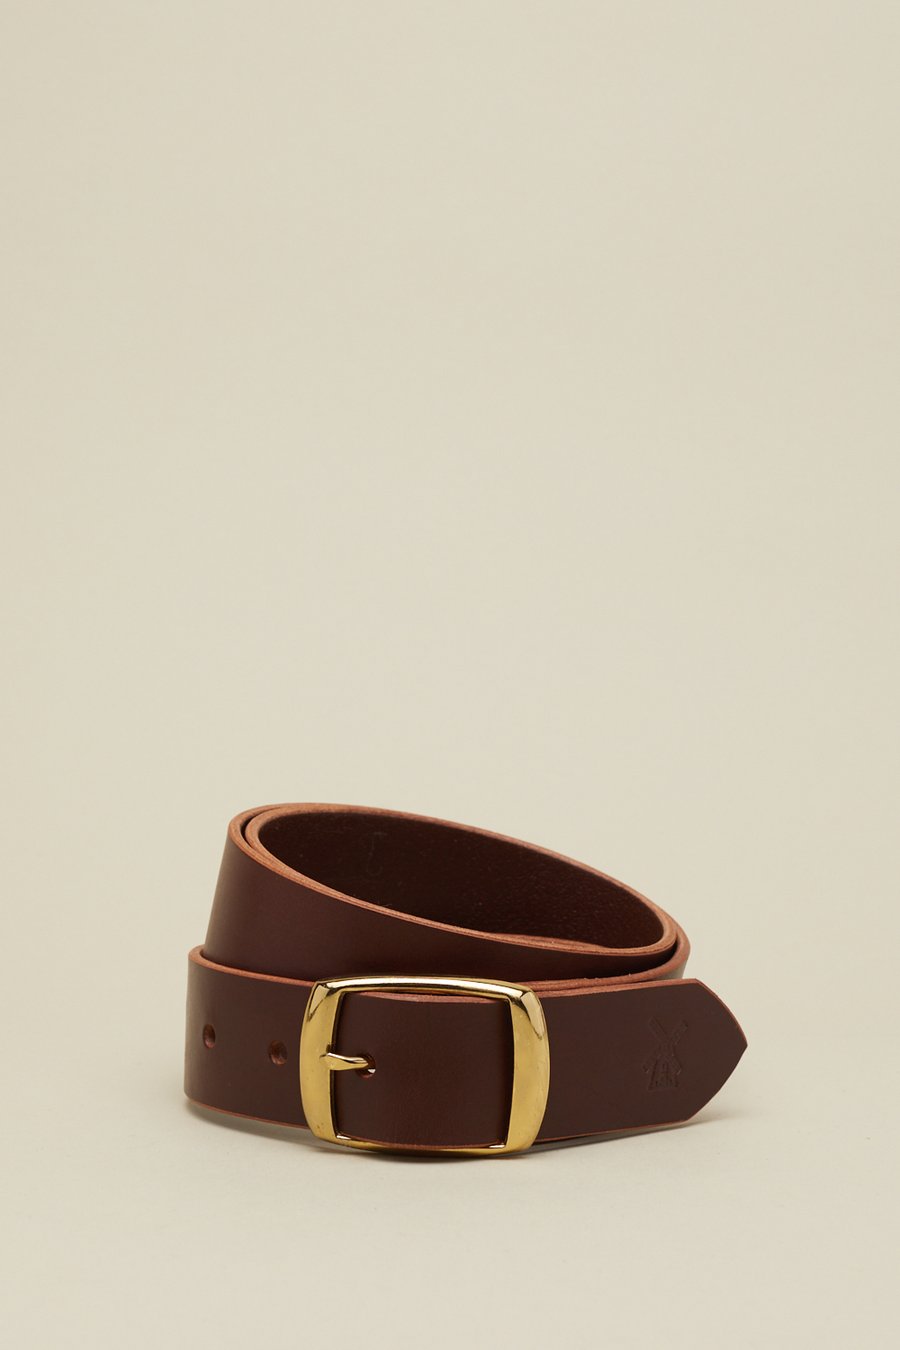 Image of Square Buckle in Chestnut